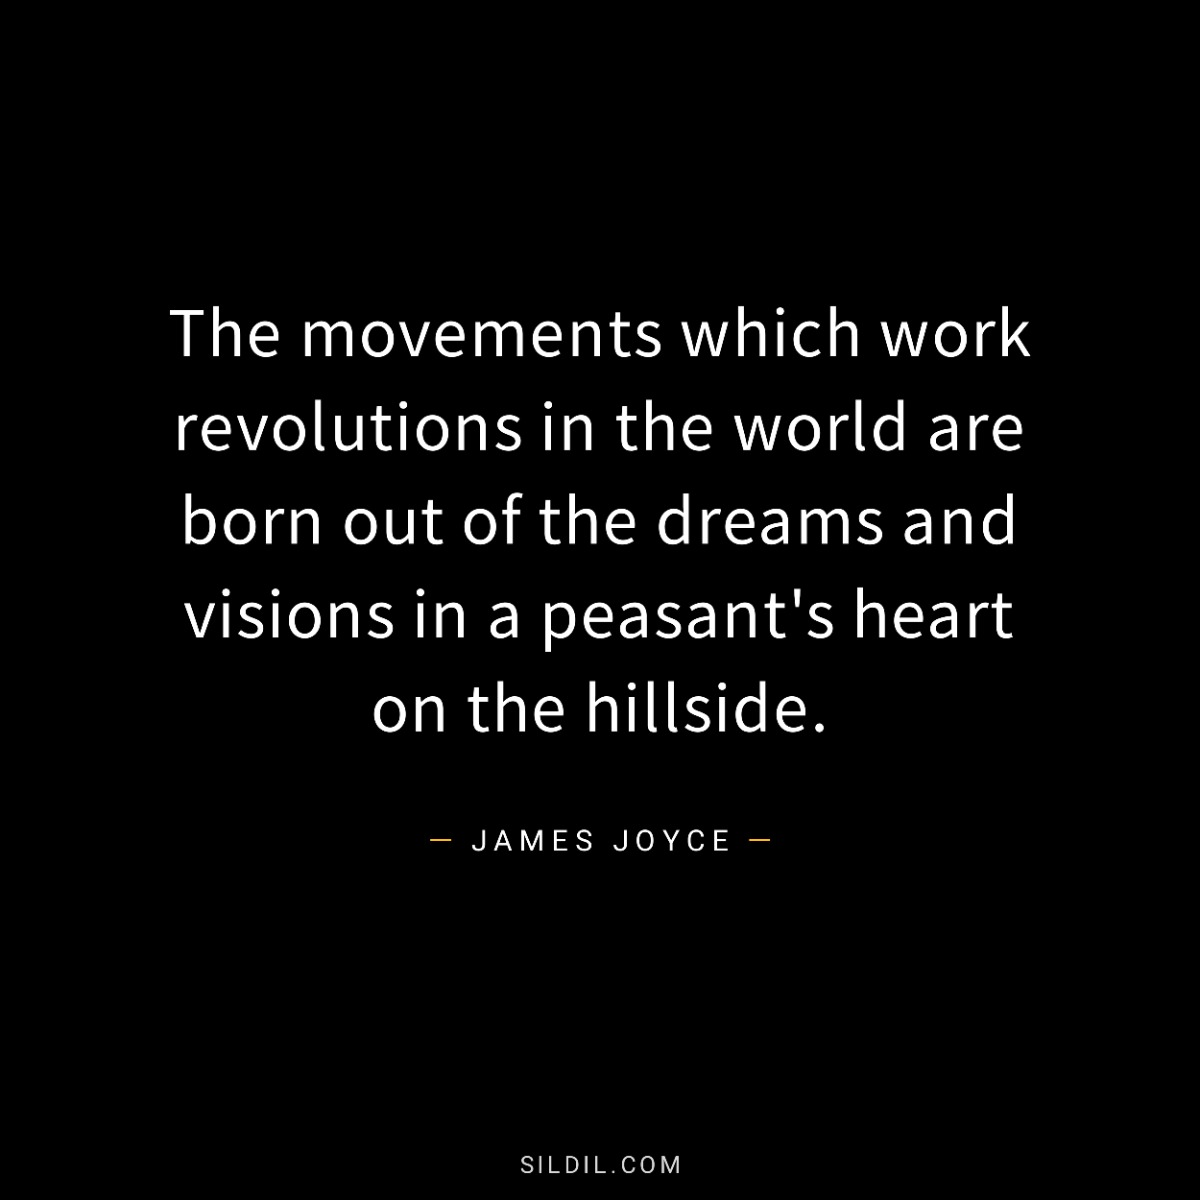 The movements which work revolutions in the world are born out of the dreams and visions in a peasant's heart on the hillside.